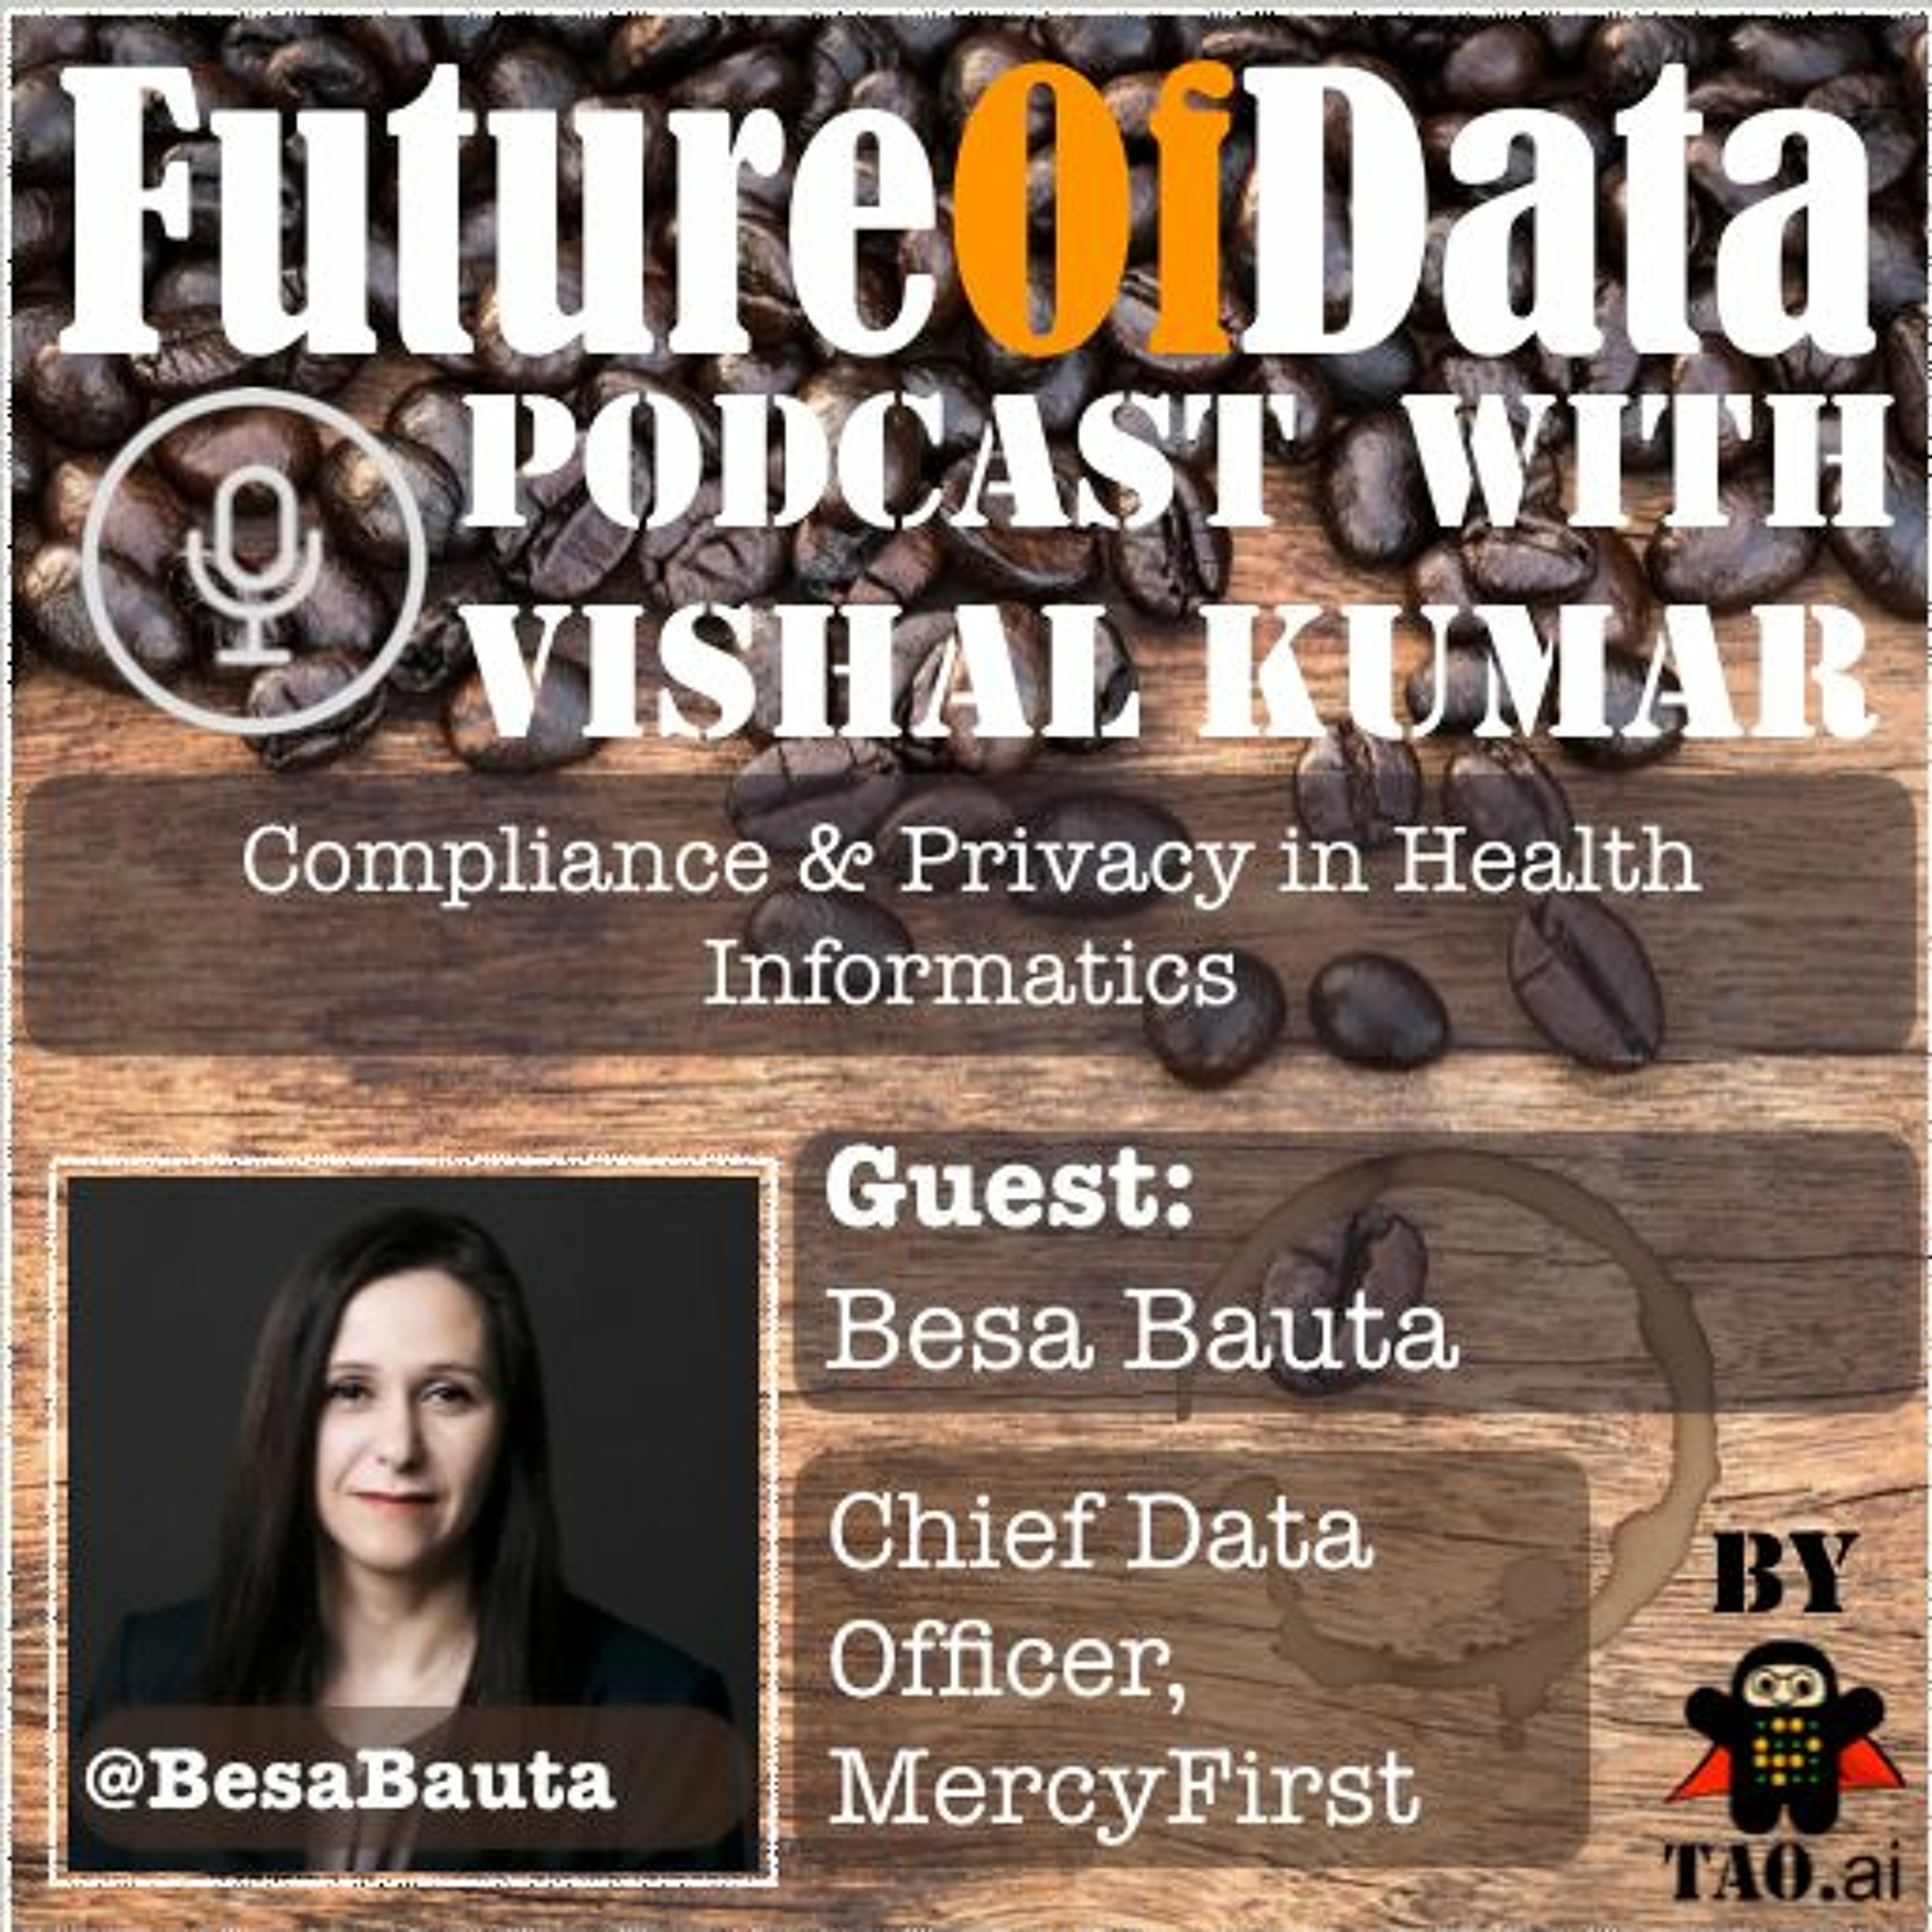 #Compliance and #Privacy in #Health #Informatics by @BesaBauta